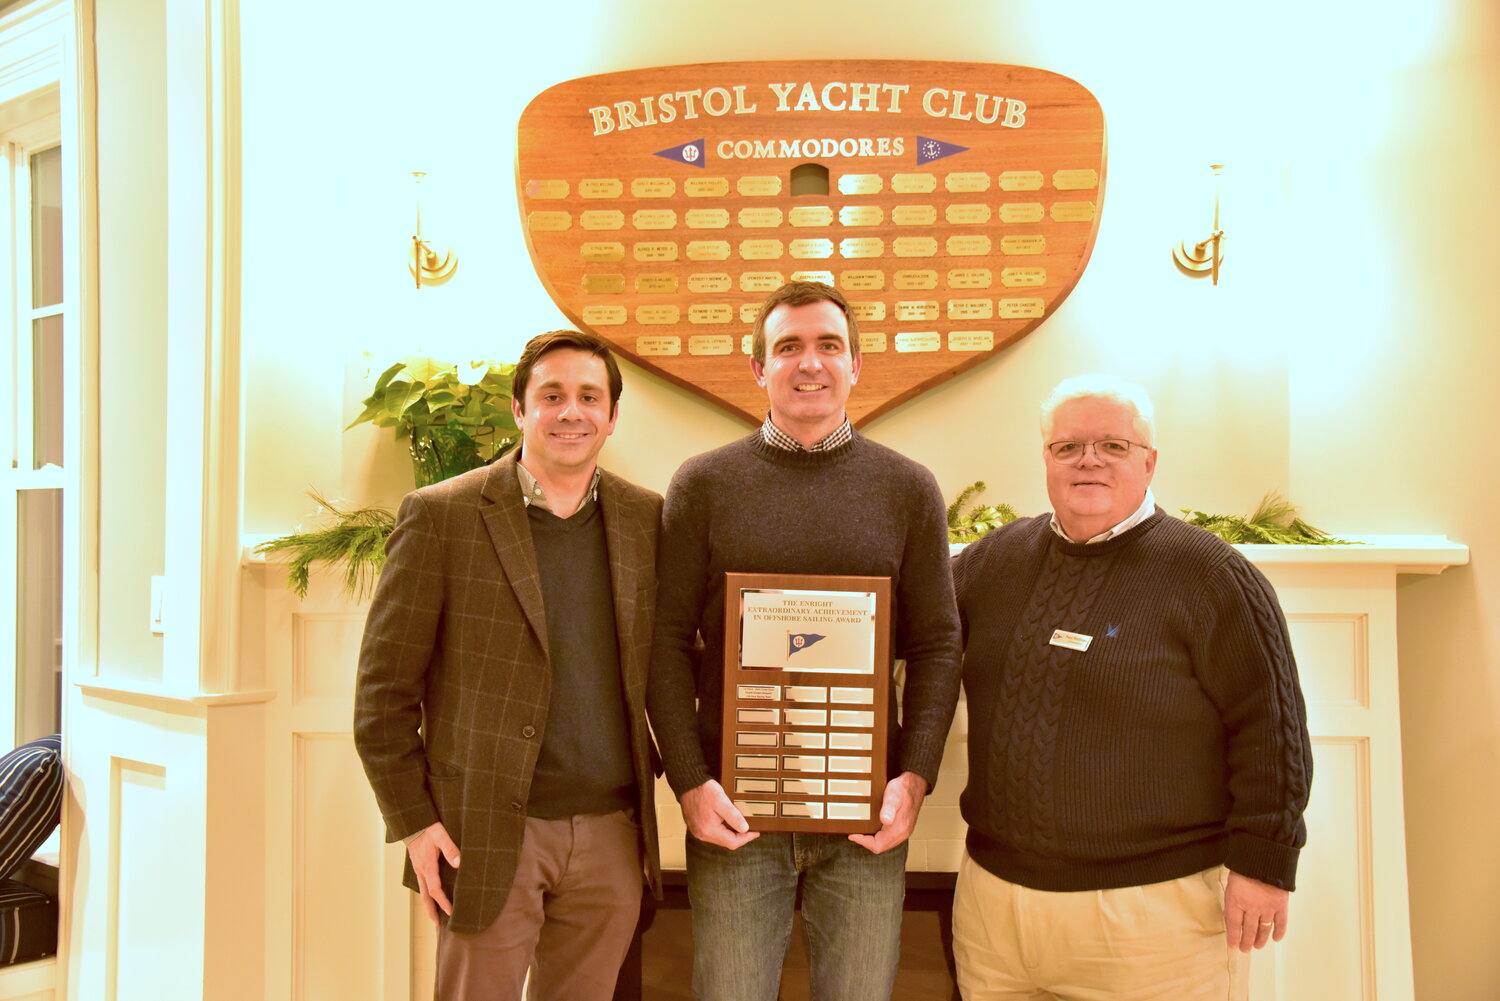 Charlie Enright is pictured here with the Bristol Yacht Club’s new perpetual trophy, the Enright Outstanding Achievement in Offshore Sailing Award, flanked by friend and fellow sailor Chris Brito (left) and BYC Commodore Paul Redman.